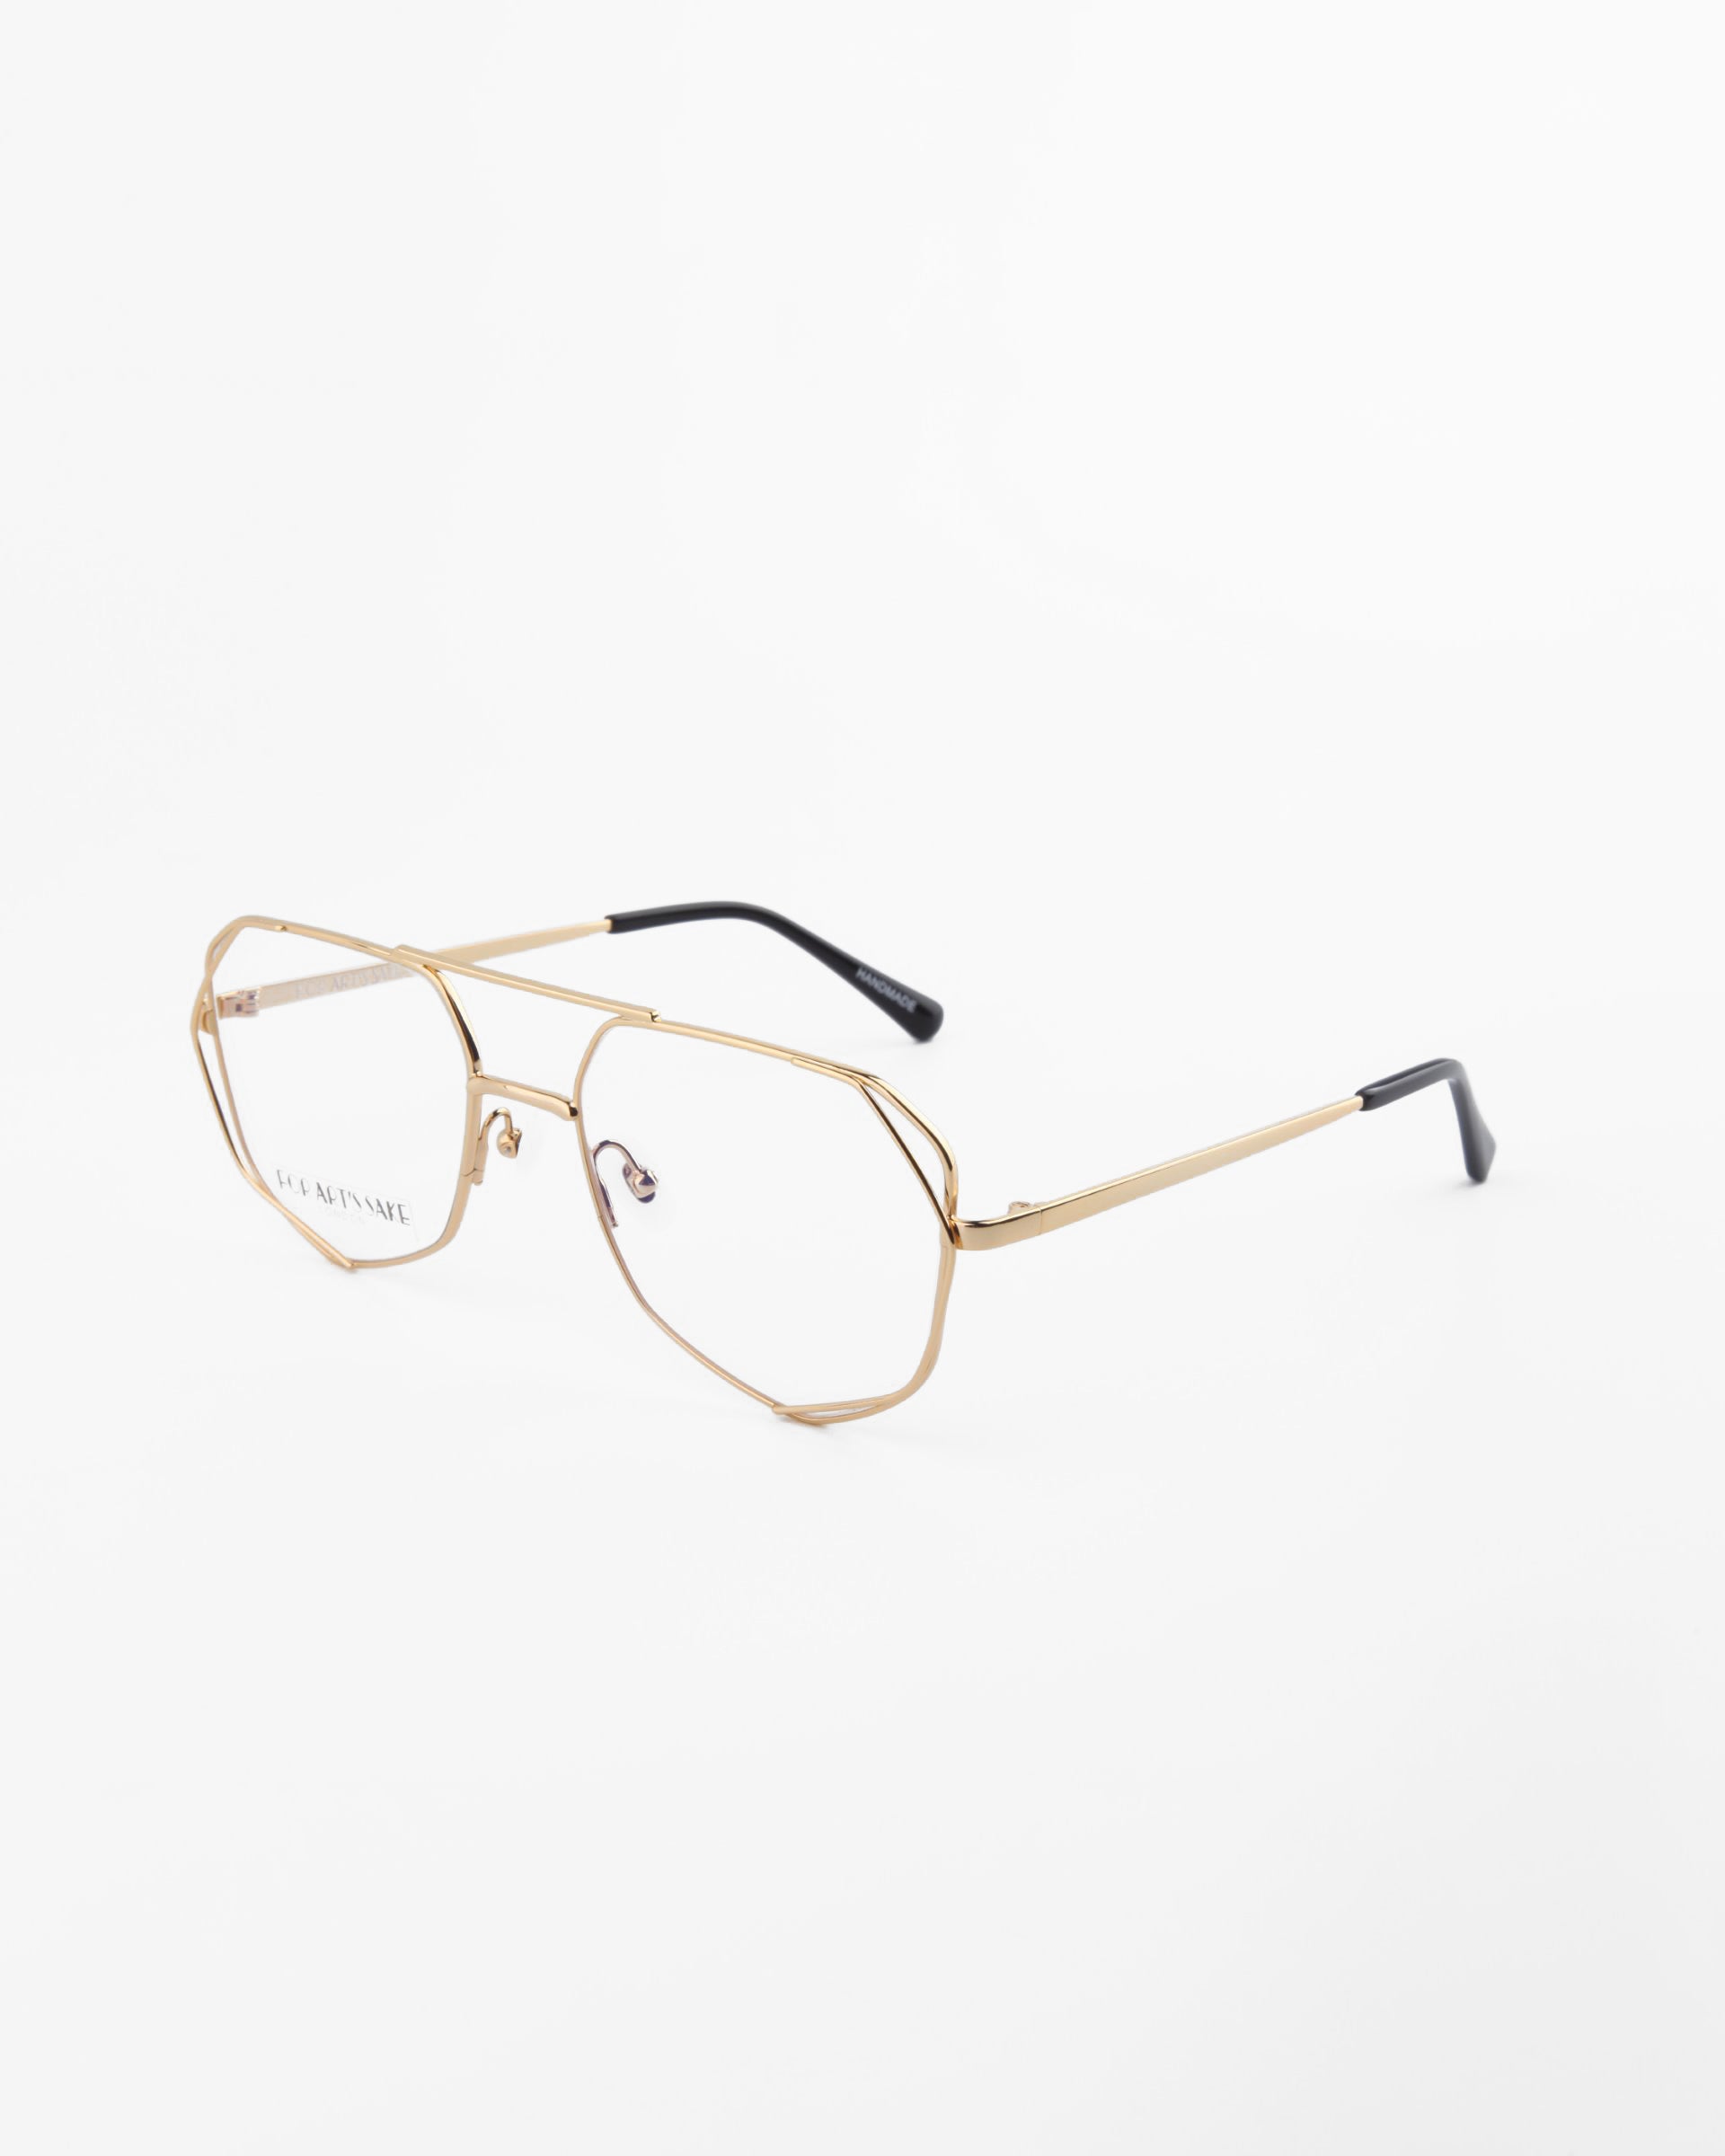 A pair of gold-framed eyeglasses with a thin, geometric design and clear lenses featuring UV protection. The temples have black tips, and the words &quot;For Art&#39;s Sake®&quot; are visible on one lens. The Genius Two glasses rest on a white background.